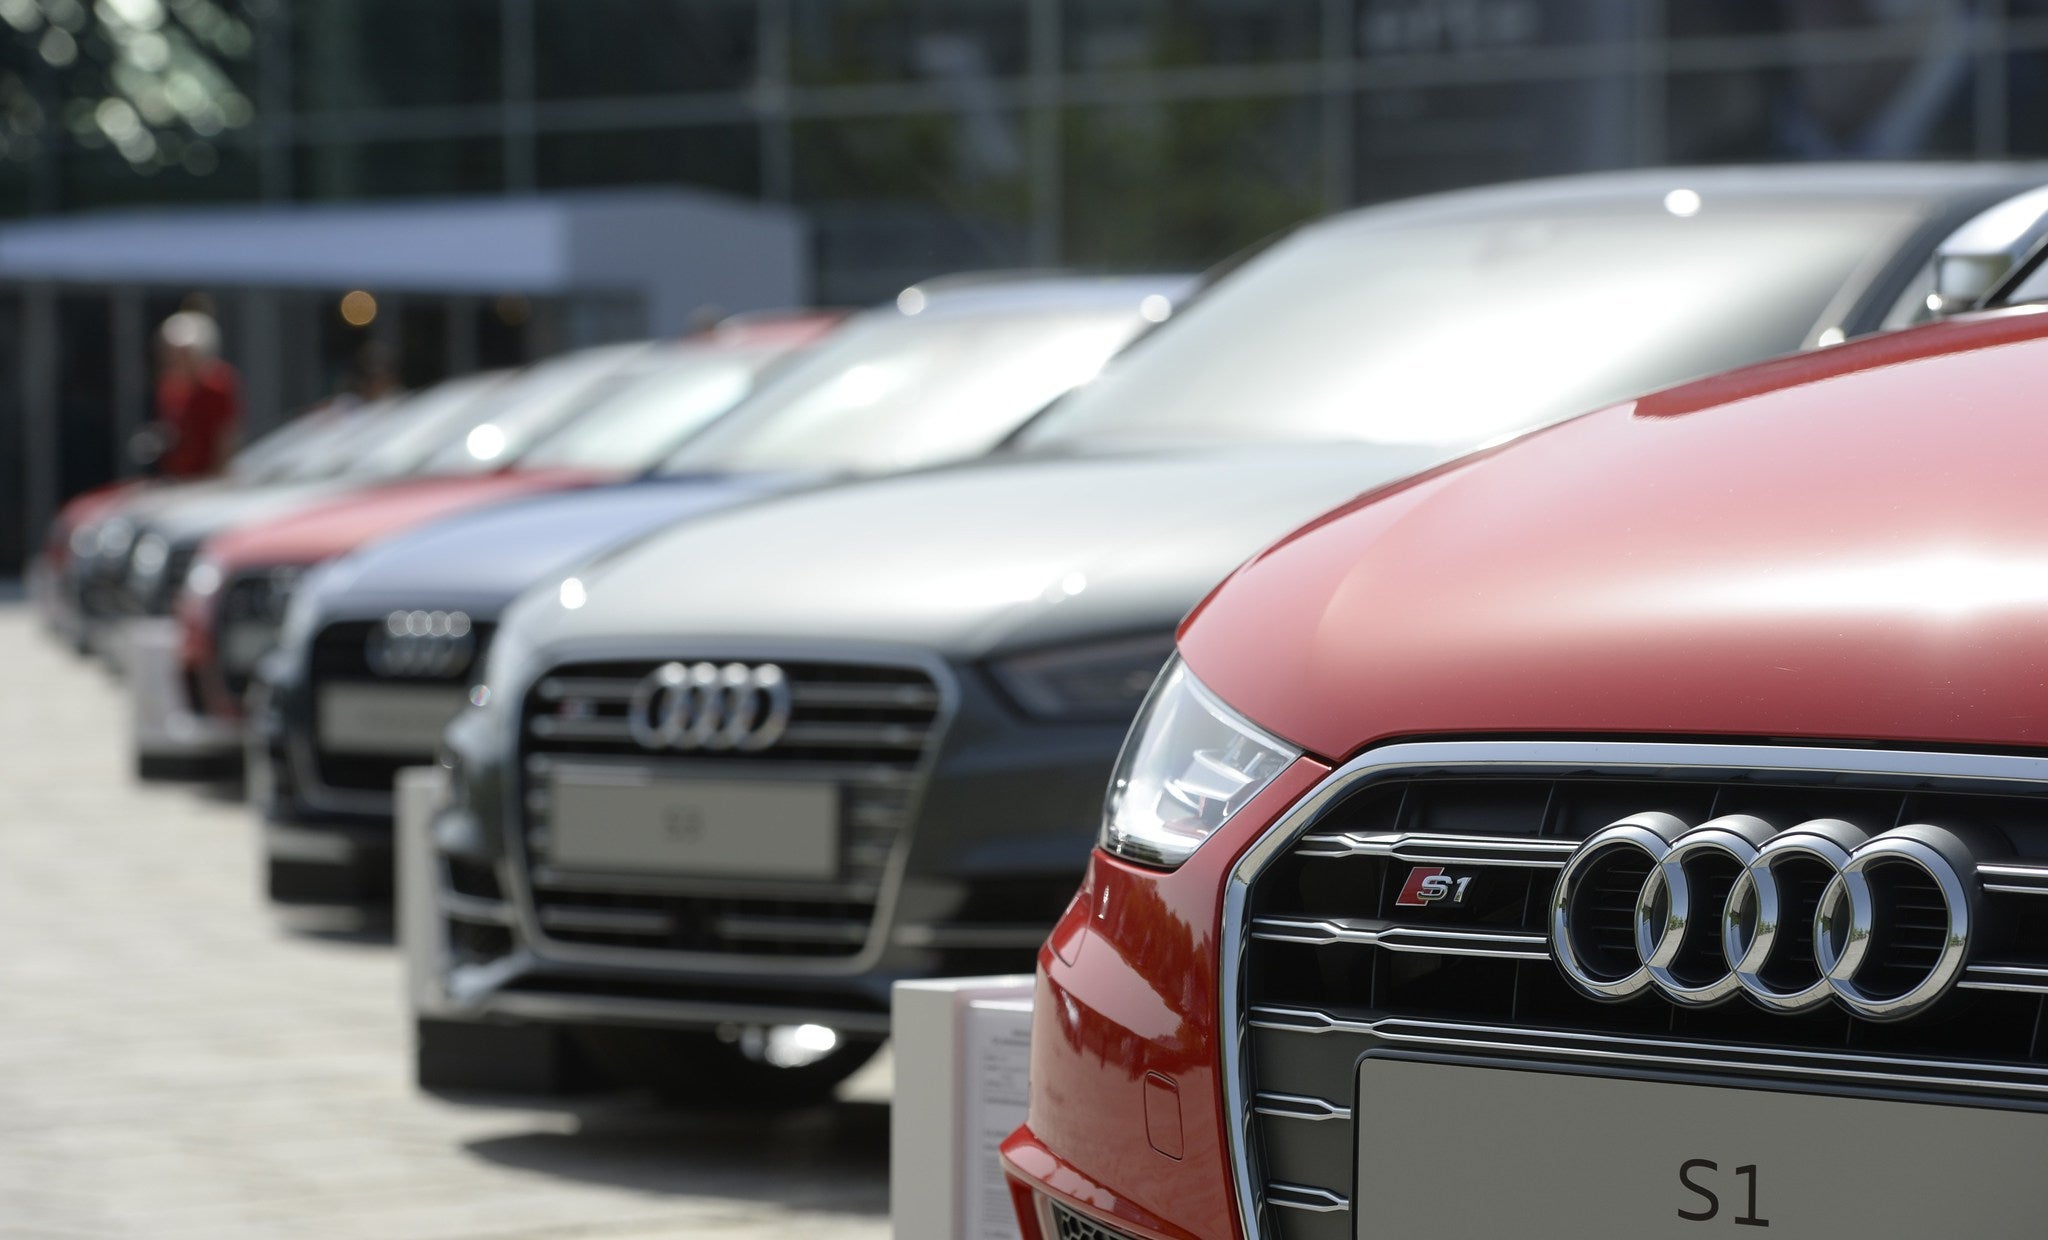 Thirty-nine Audi cars have been broken into this week in Leicestershire